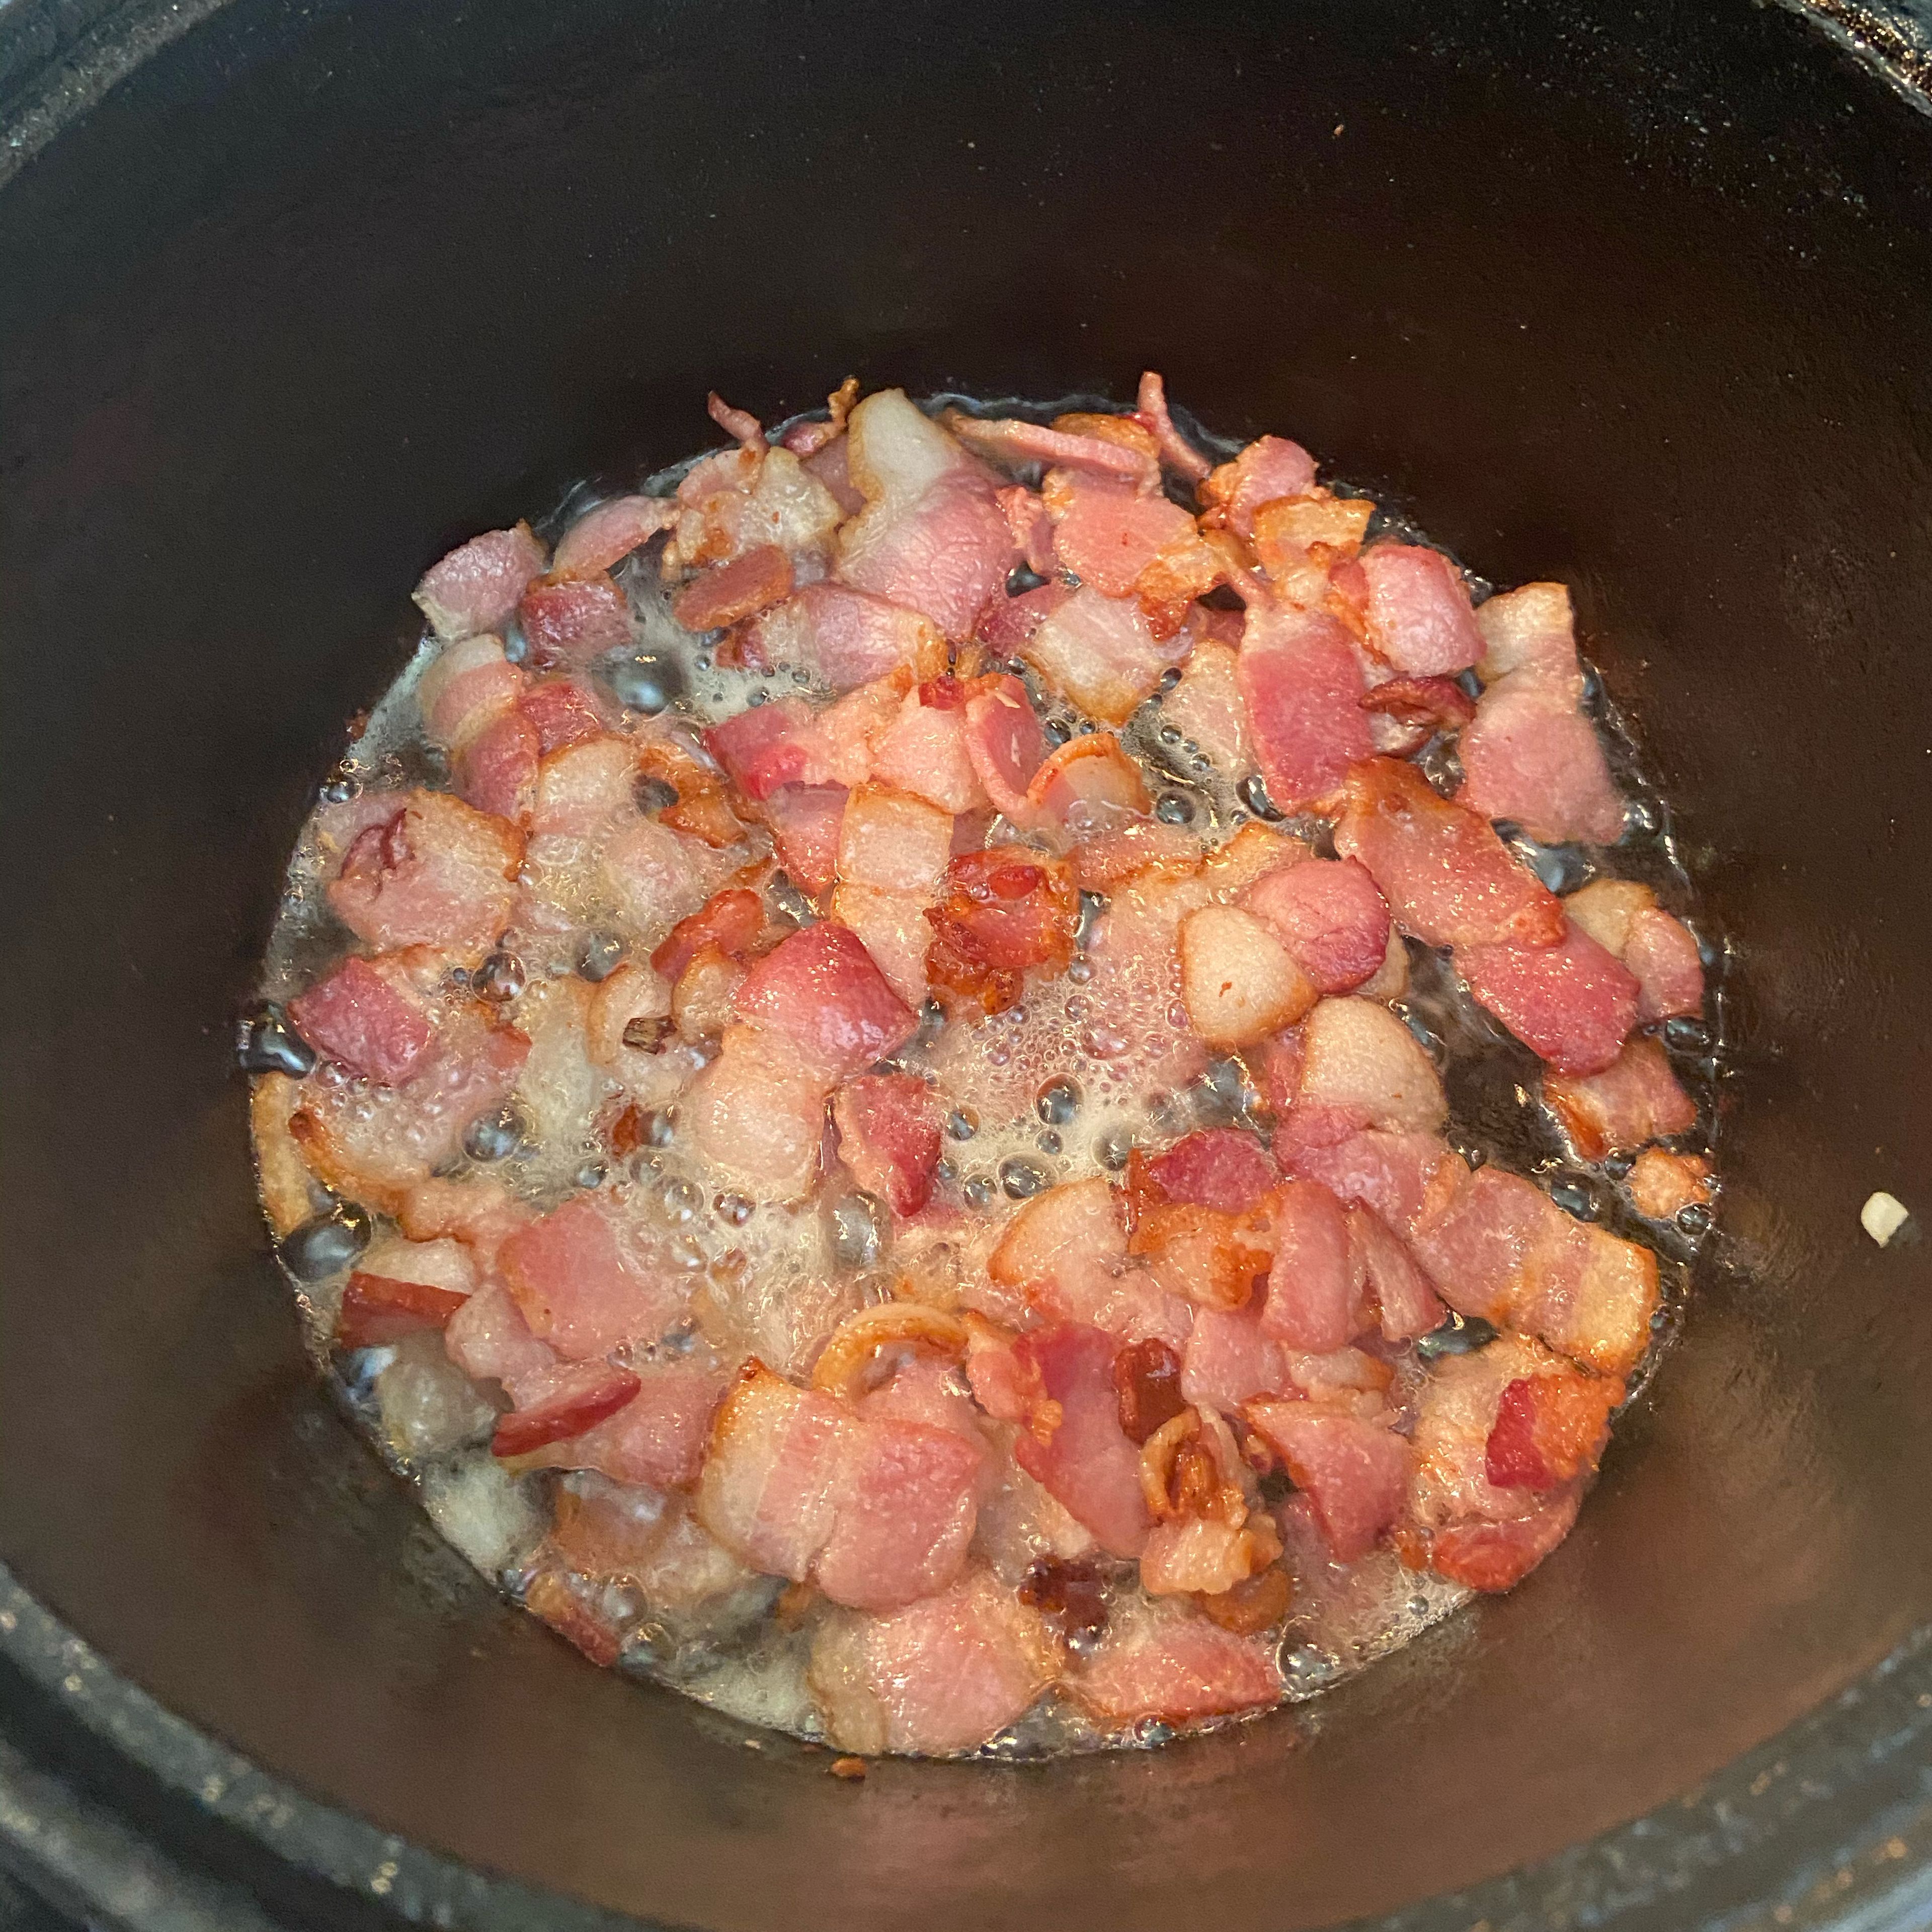 Once the bacon has browned add the onions, green beans, and garlic and sauté for another 2 to 3 minutes.￼ don’t worry about draining that grease, you want all that delicious flavor.￼